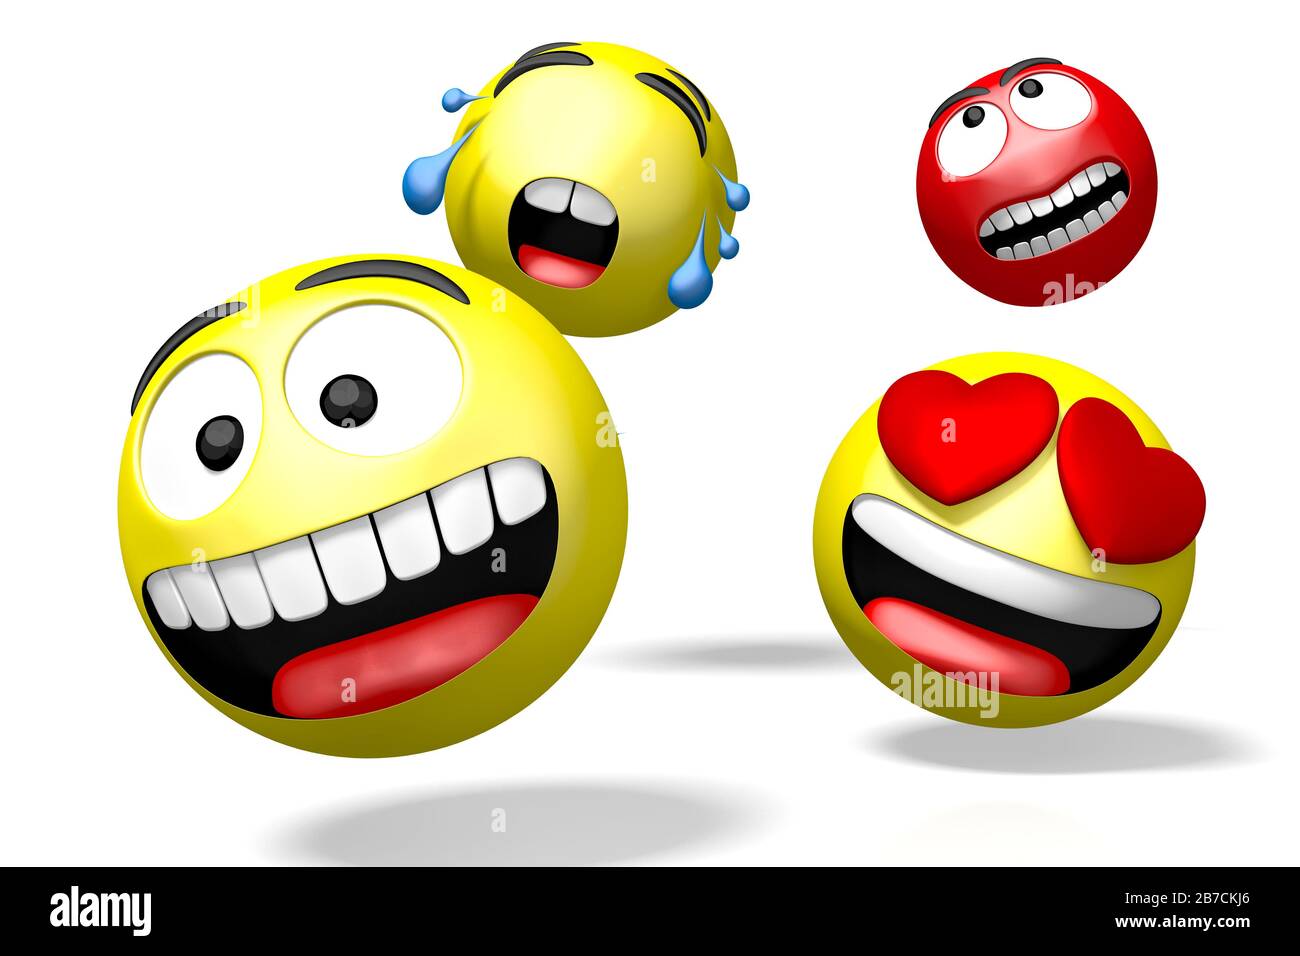 Emojis/ emoticons - different facial expressions - 3D rendering Stock Photo  - Alamy